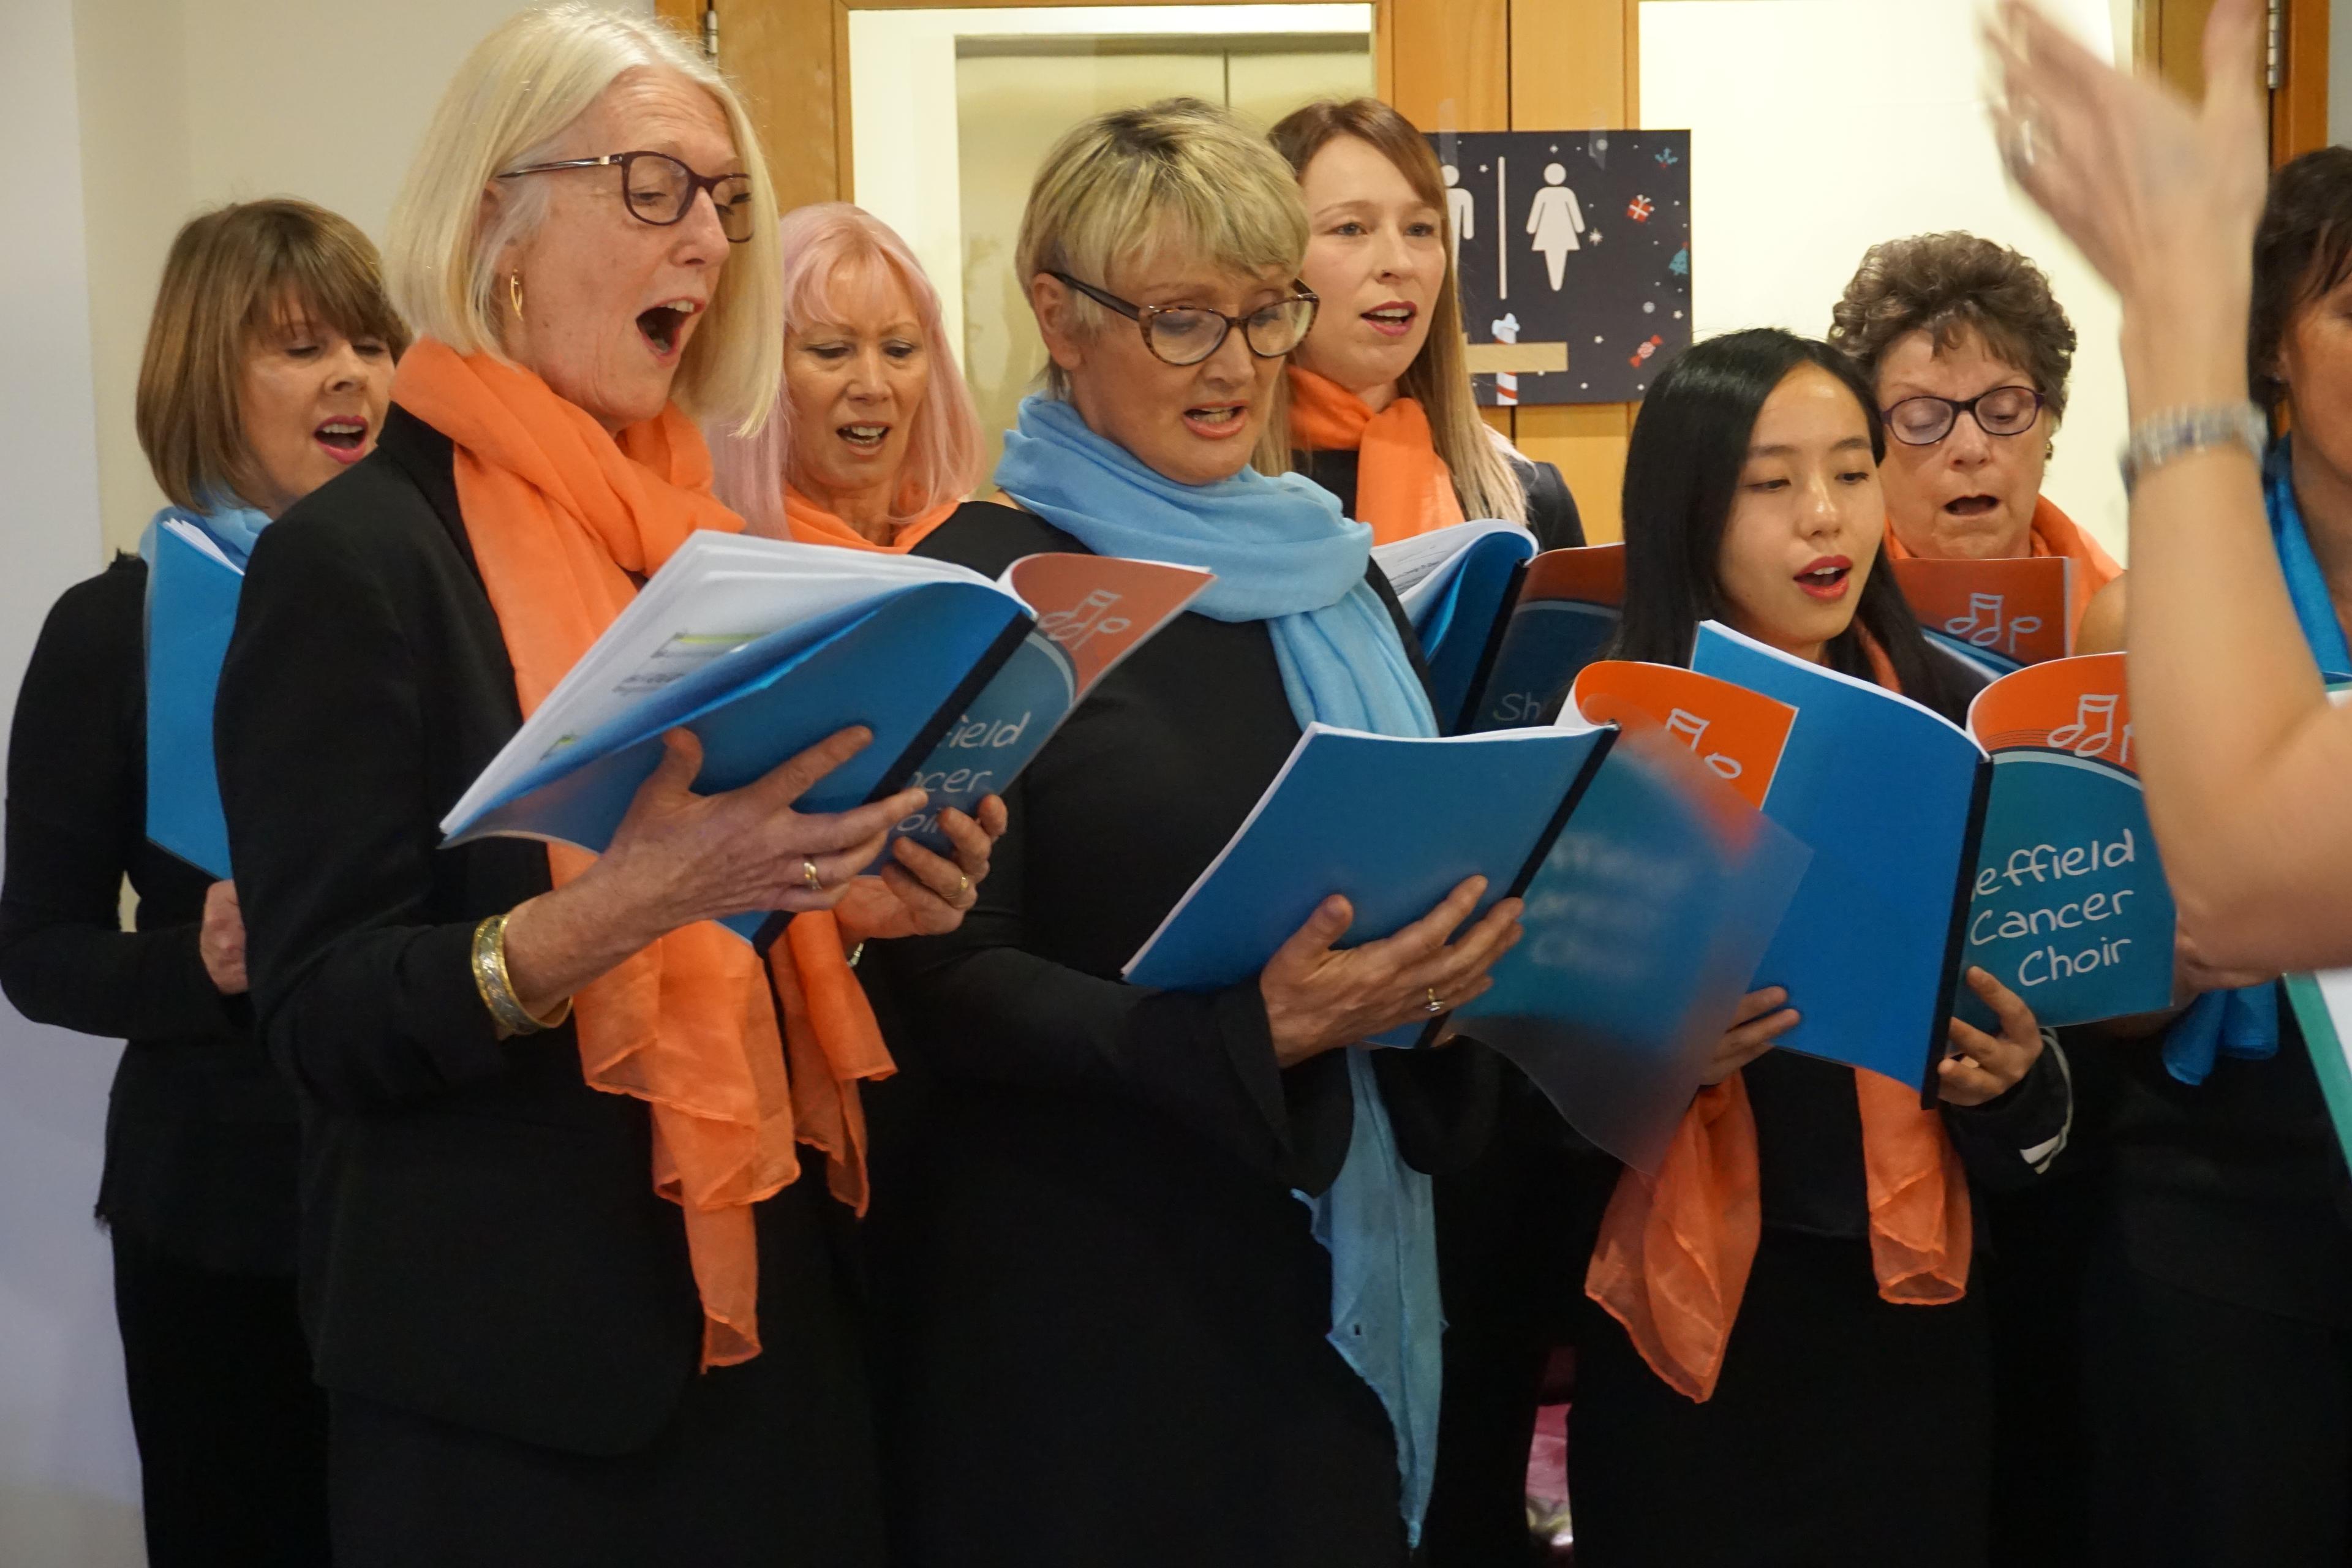 Eight members of Sheffield Cancer Choir perform indoors, holding sheets of music.